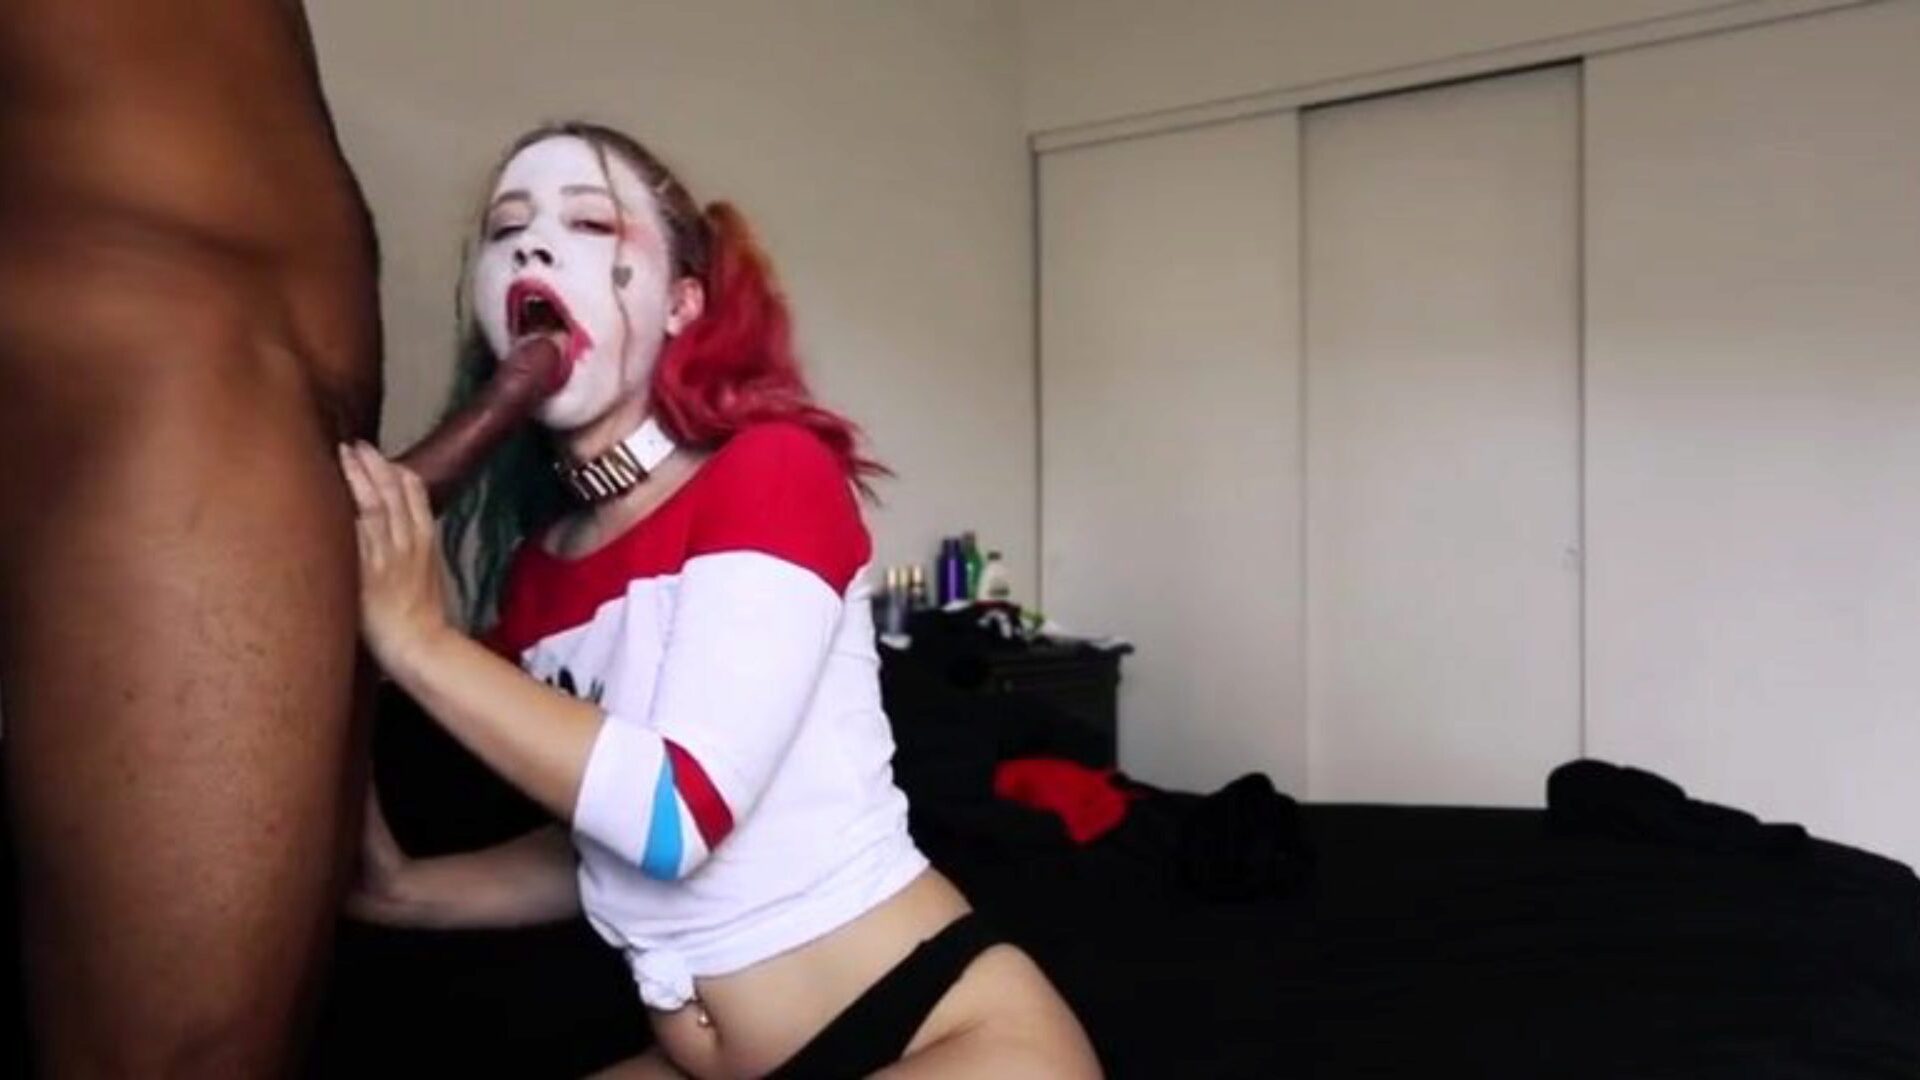 IDEAL BODY PAWG HARLEY QUINN RECEIVES DRILLED BY BBC FOR #HALLOWEEN2019